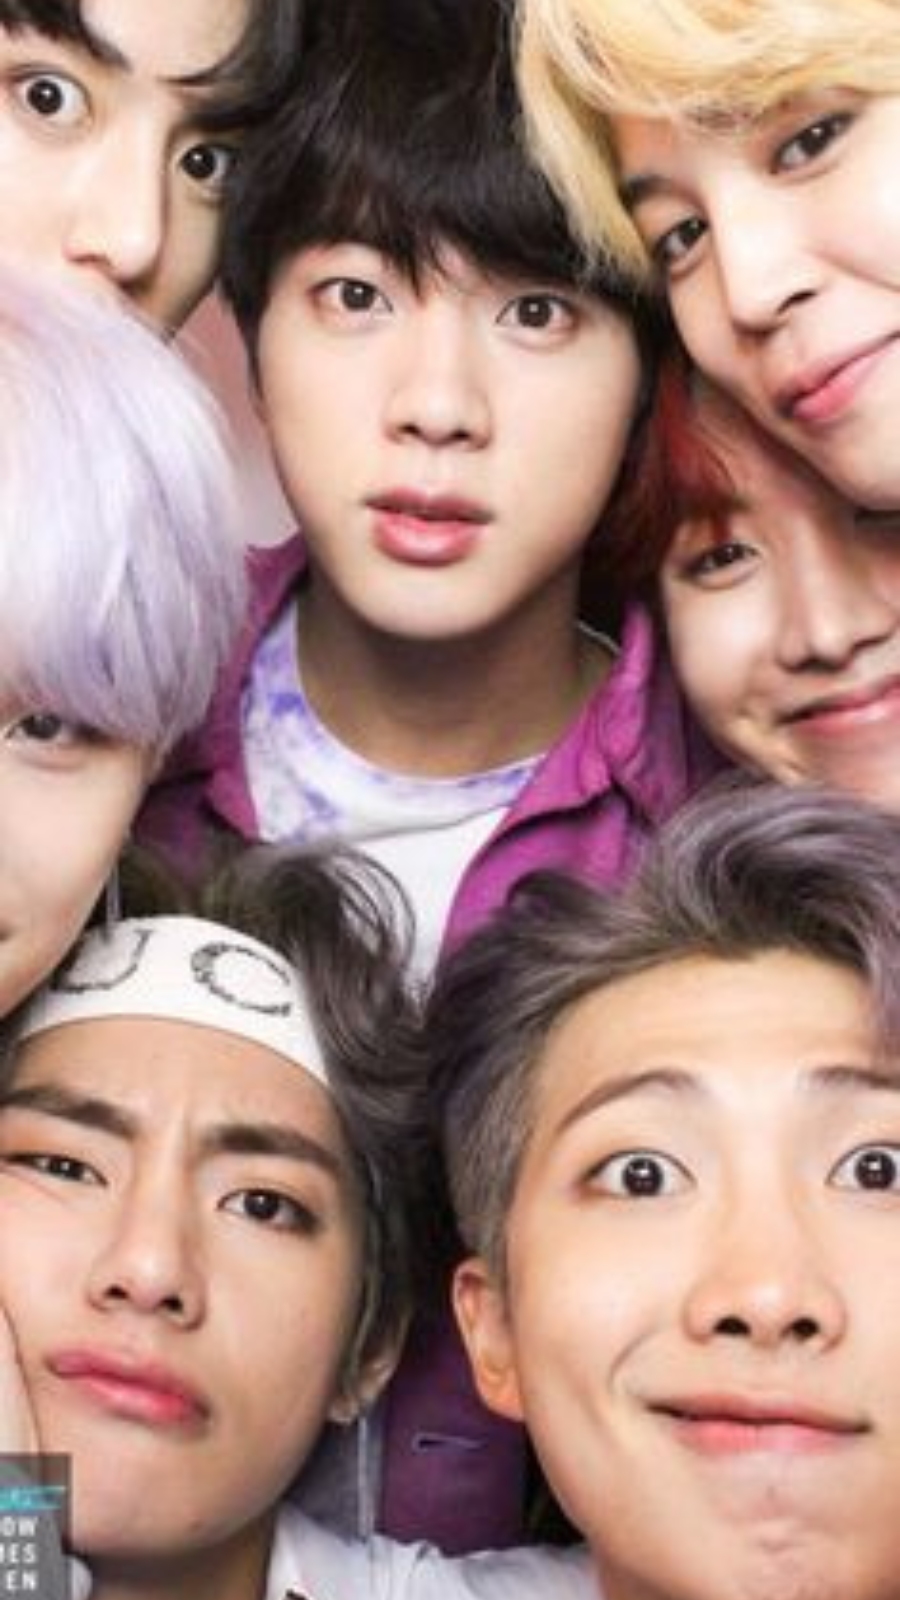 BTS military: V, RM, Jin and other BTS member military joining